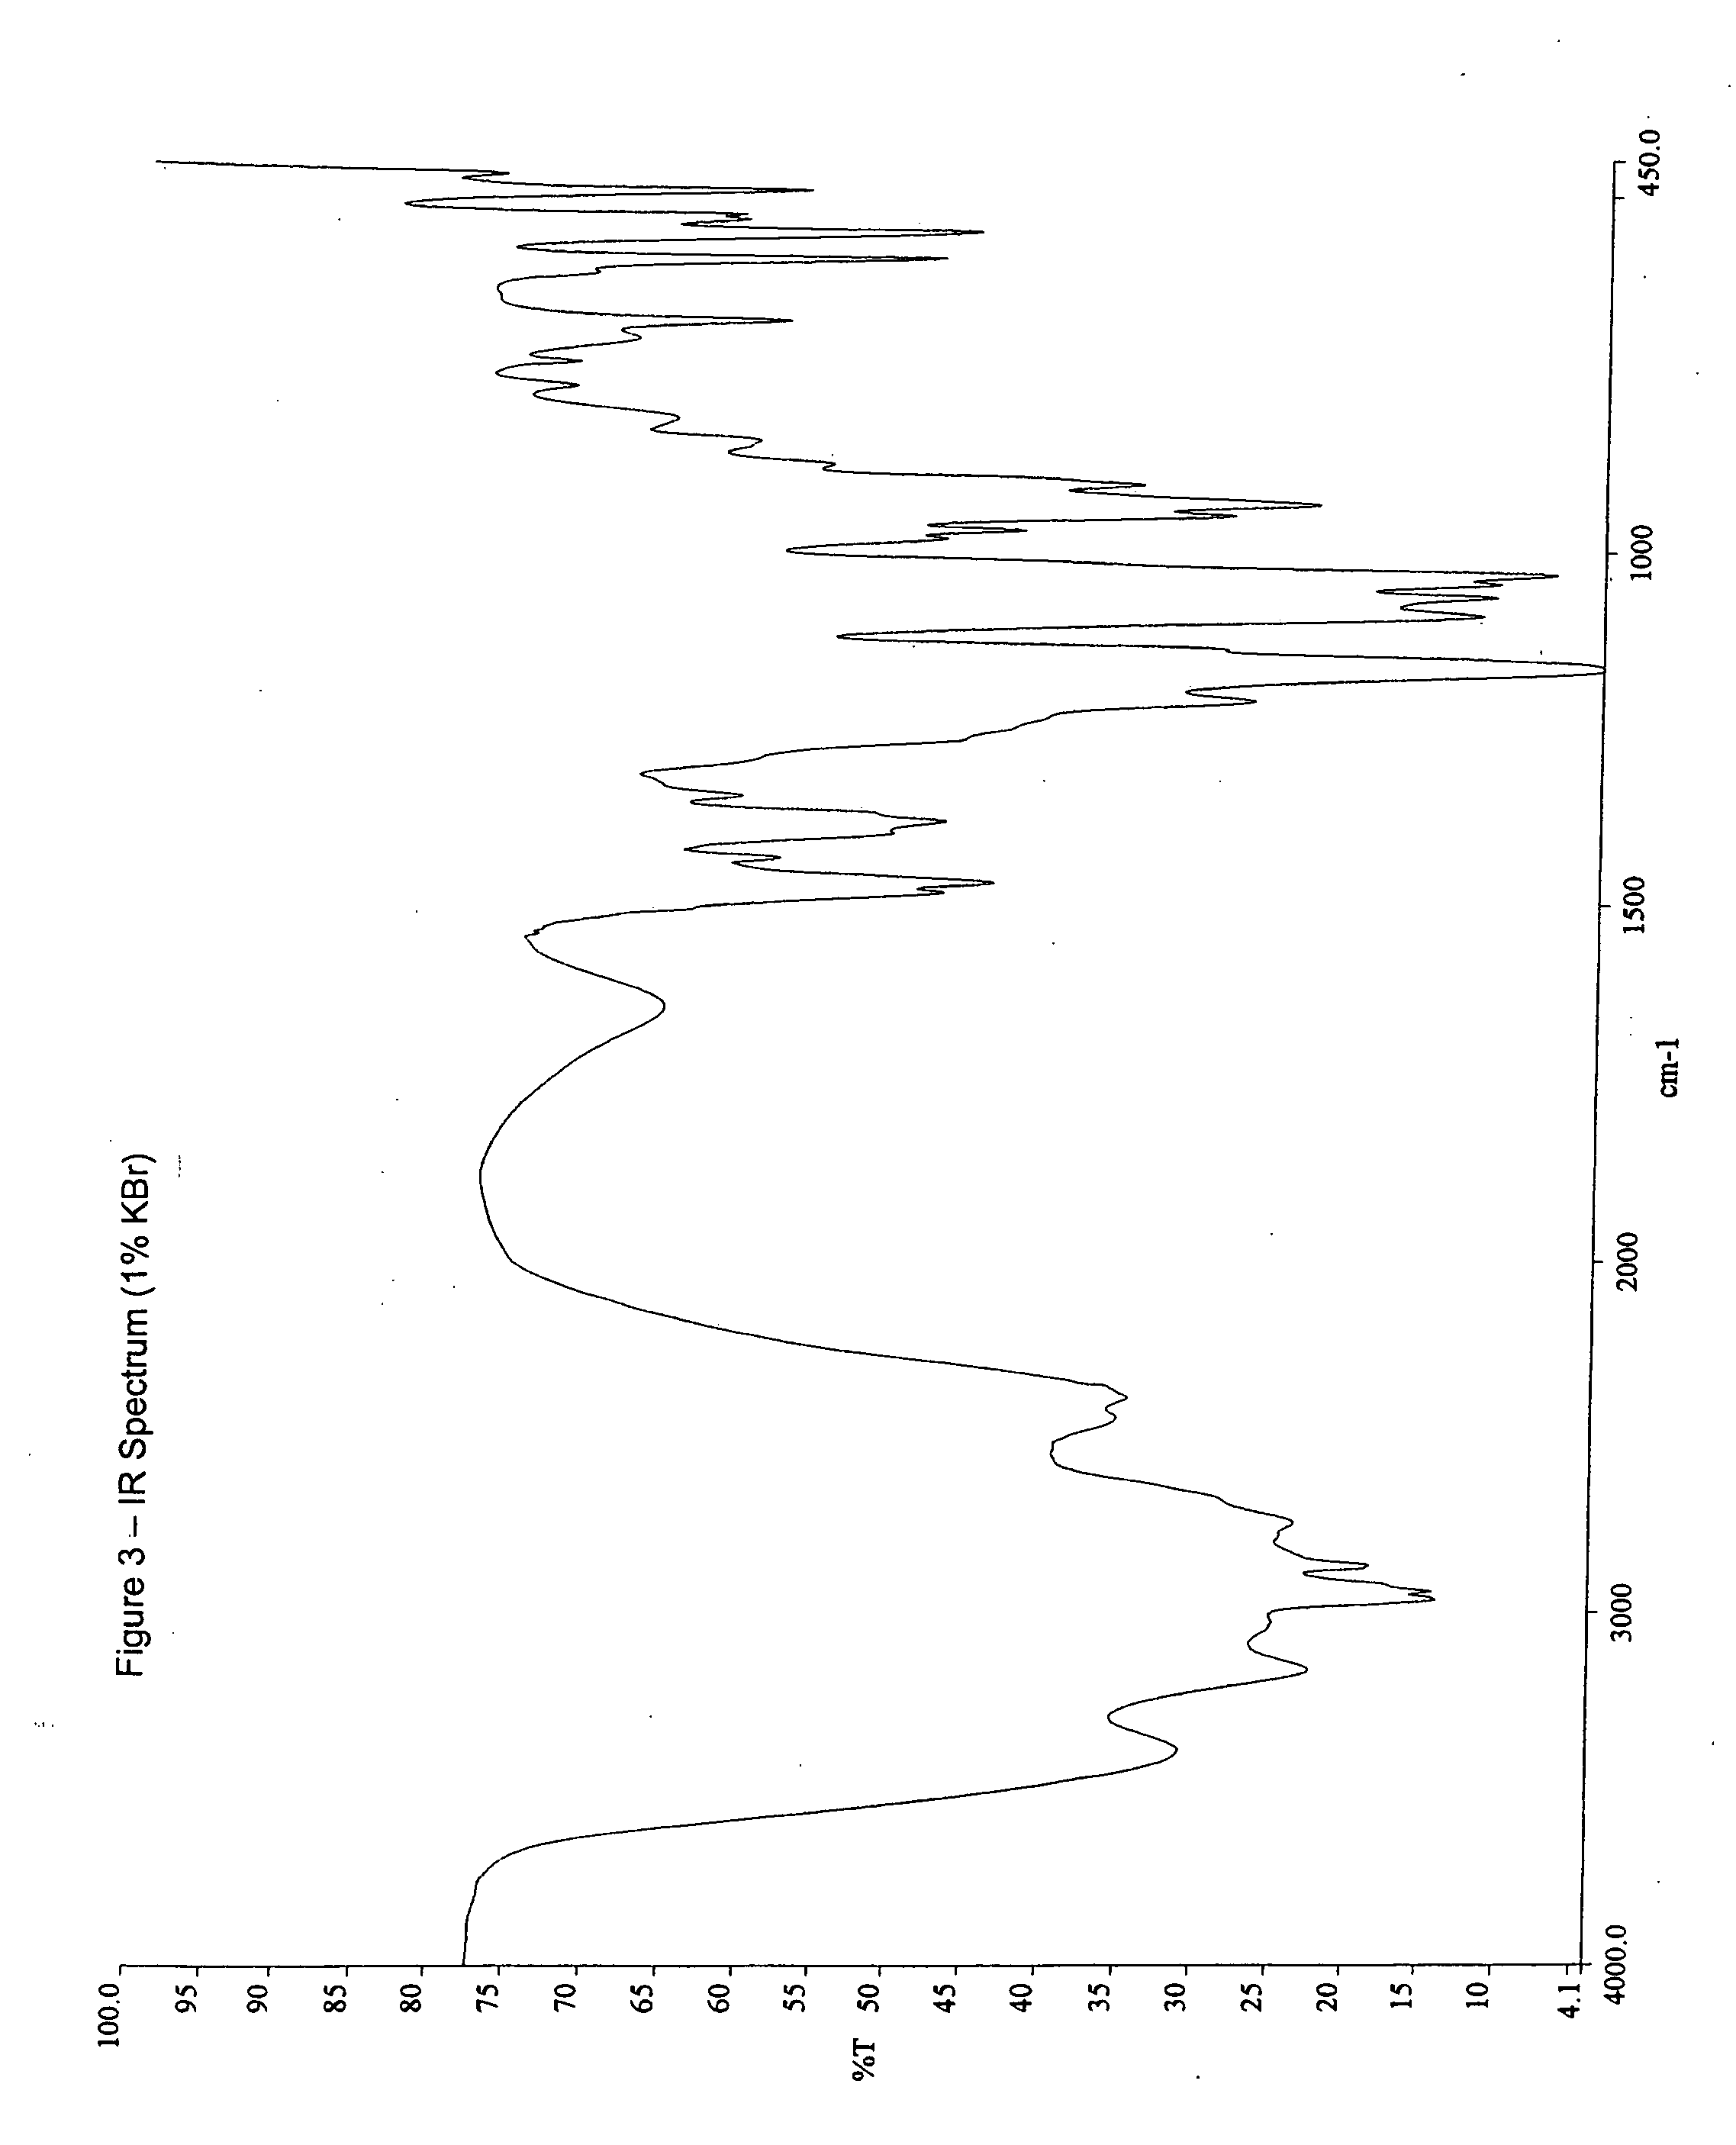 Ibandronate sodium propylene glycol solvate and processes for the preparation thereof